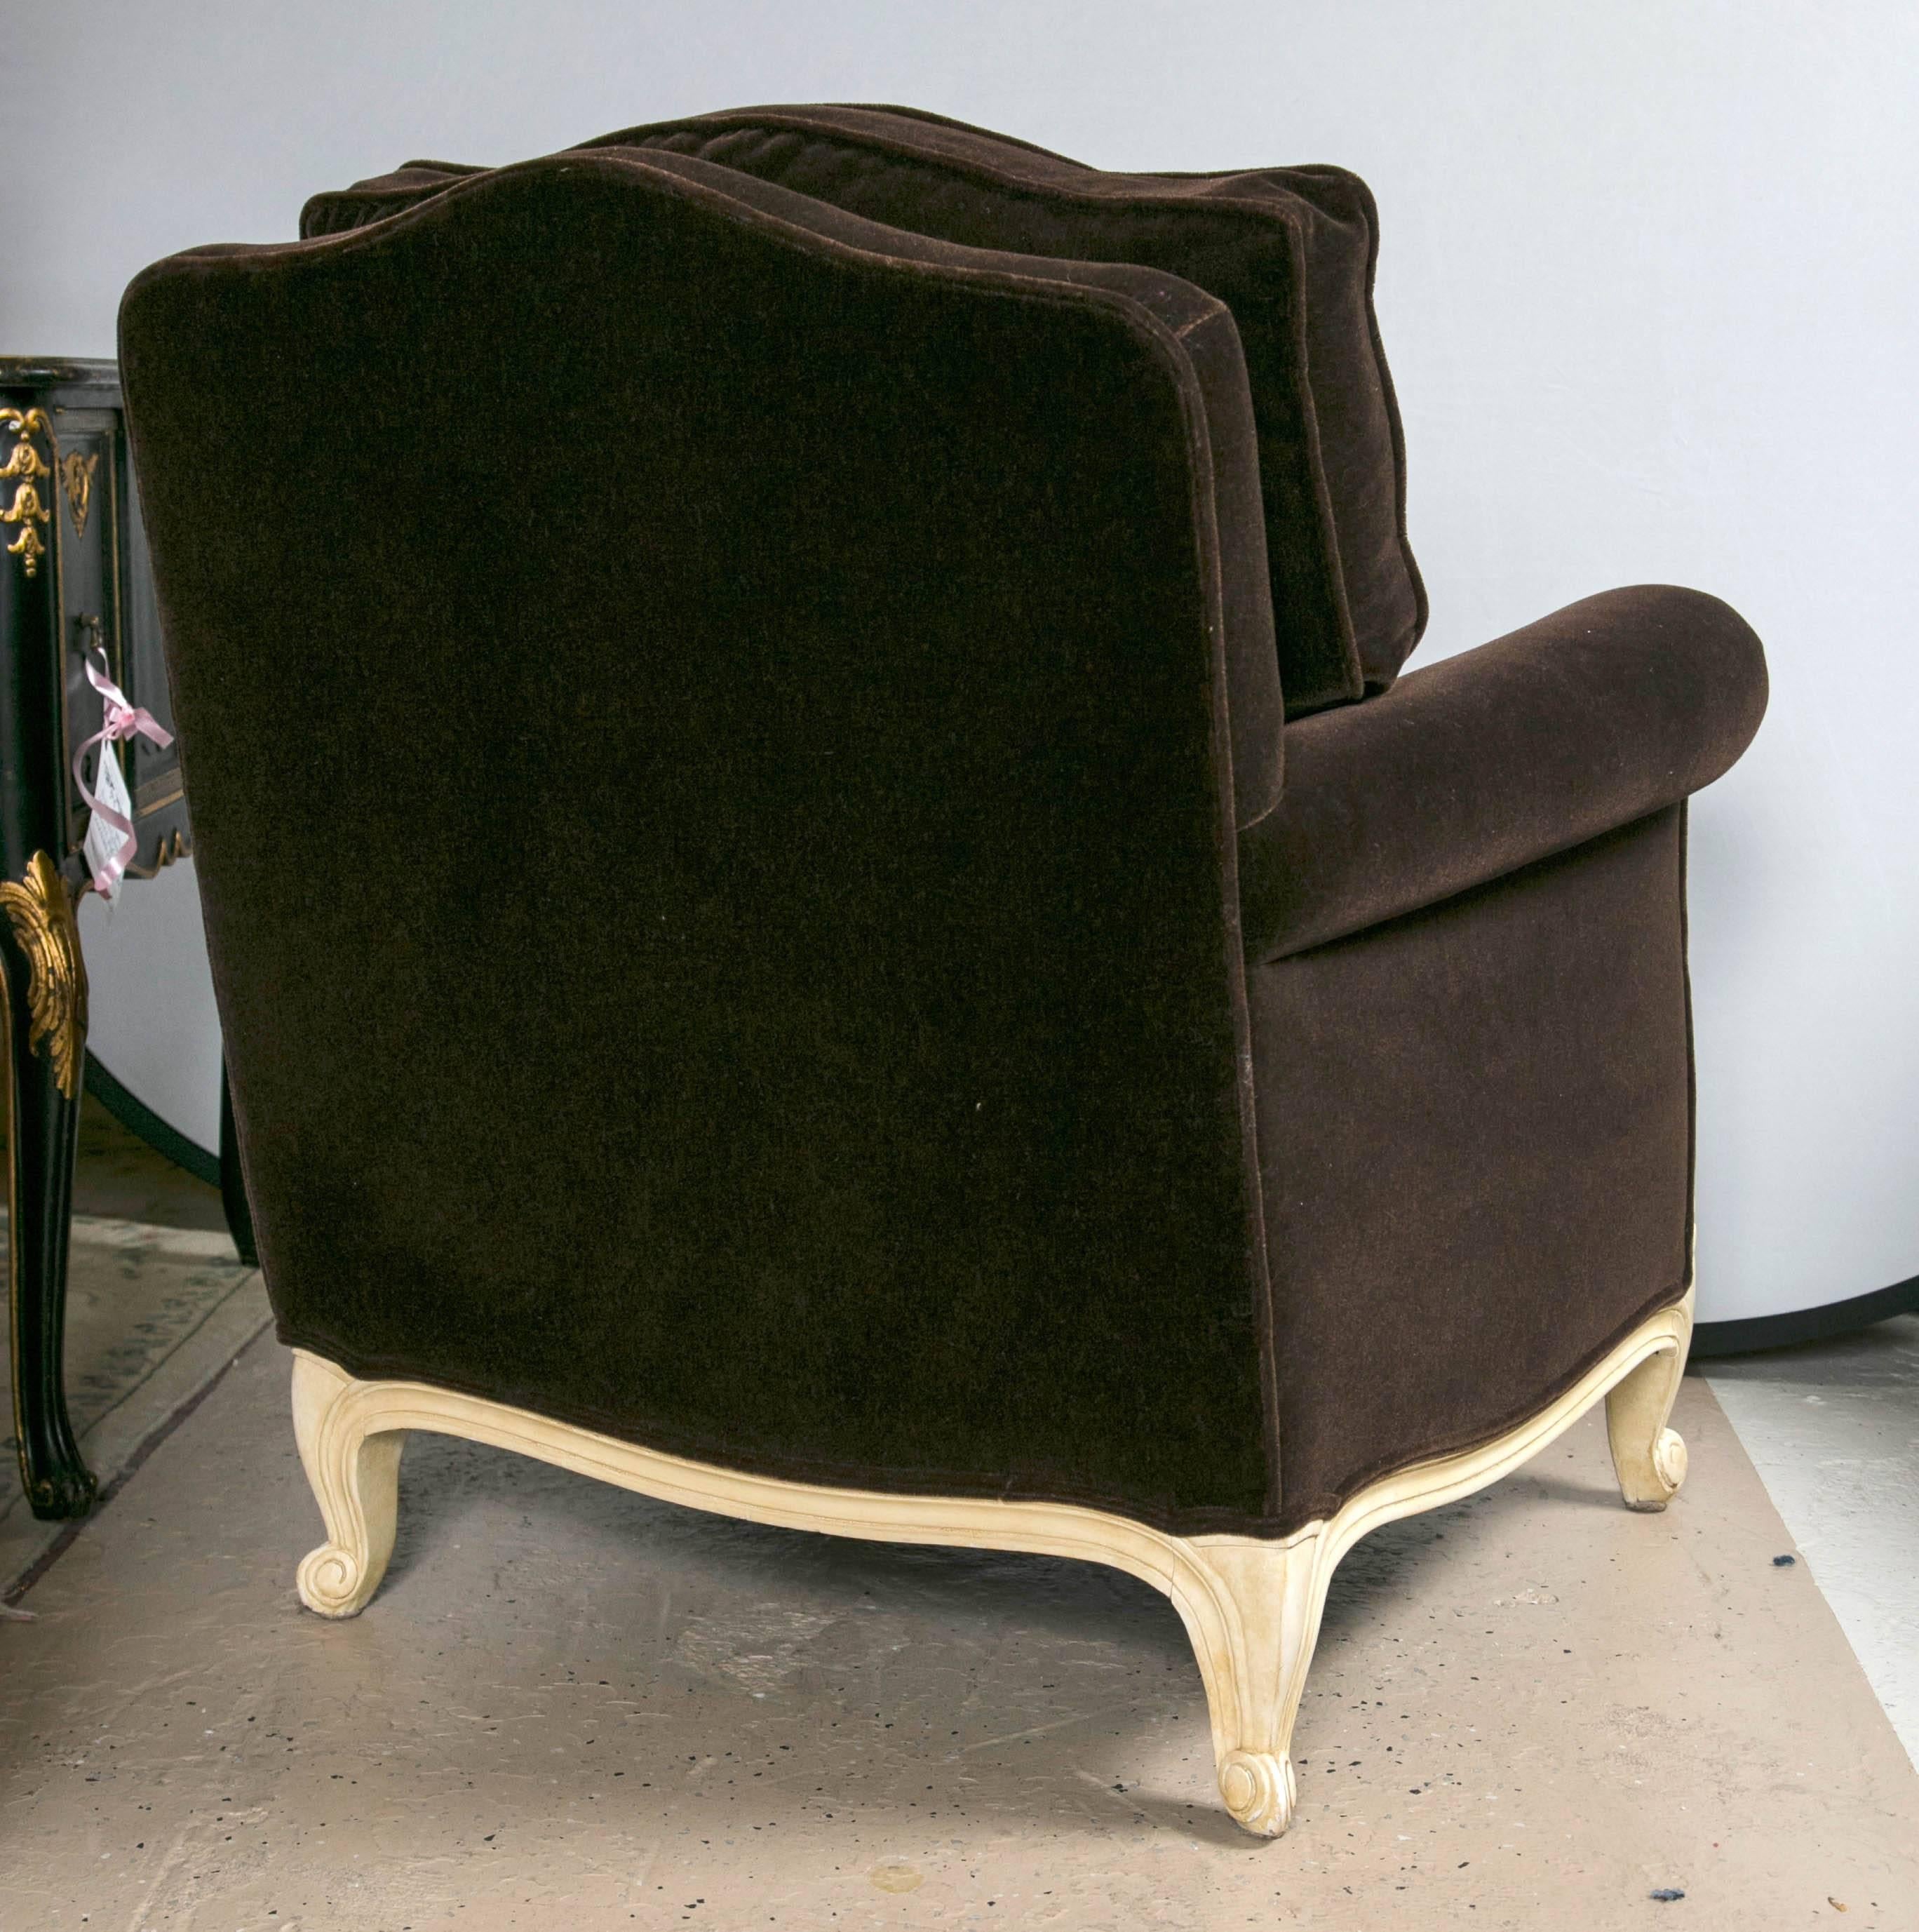 Mid-20th Century ON SALE NOW! SALE! Pair of  Gorgeous Chocolate Mohair Down Chairs Louis XV Style